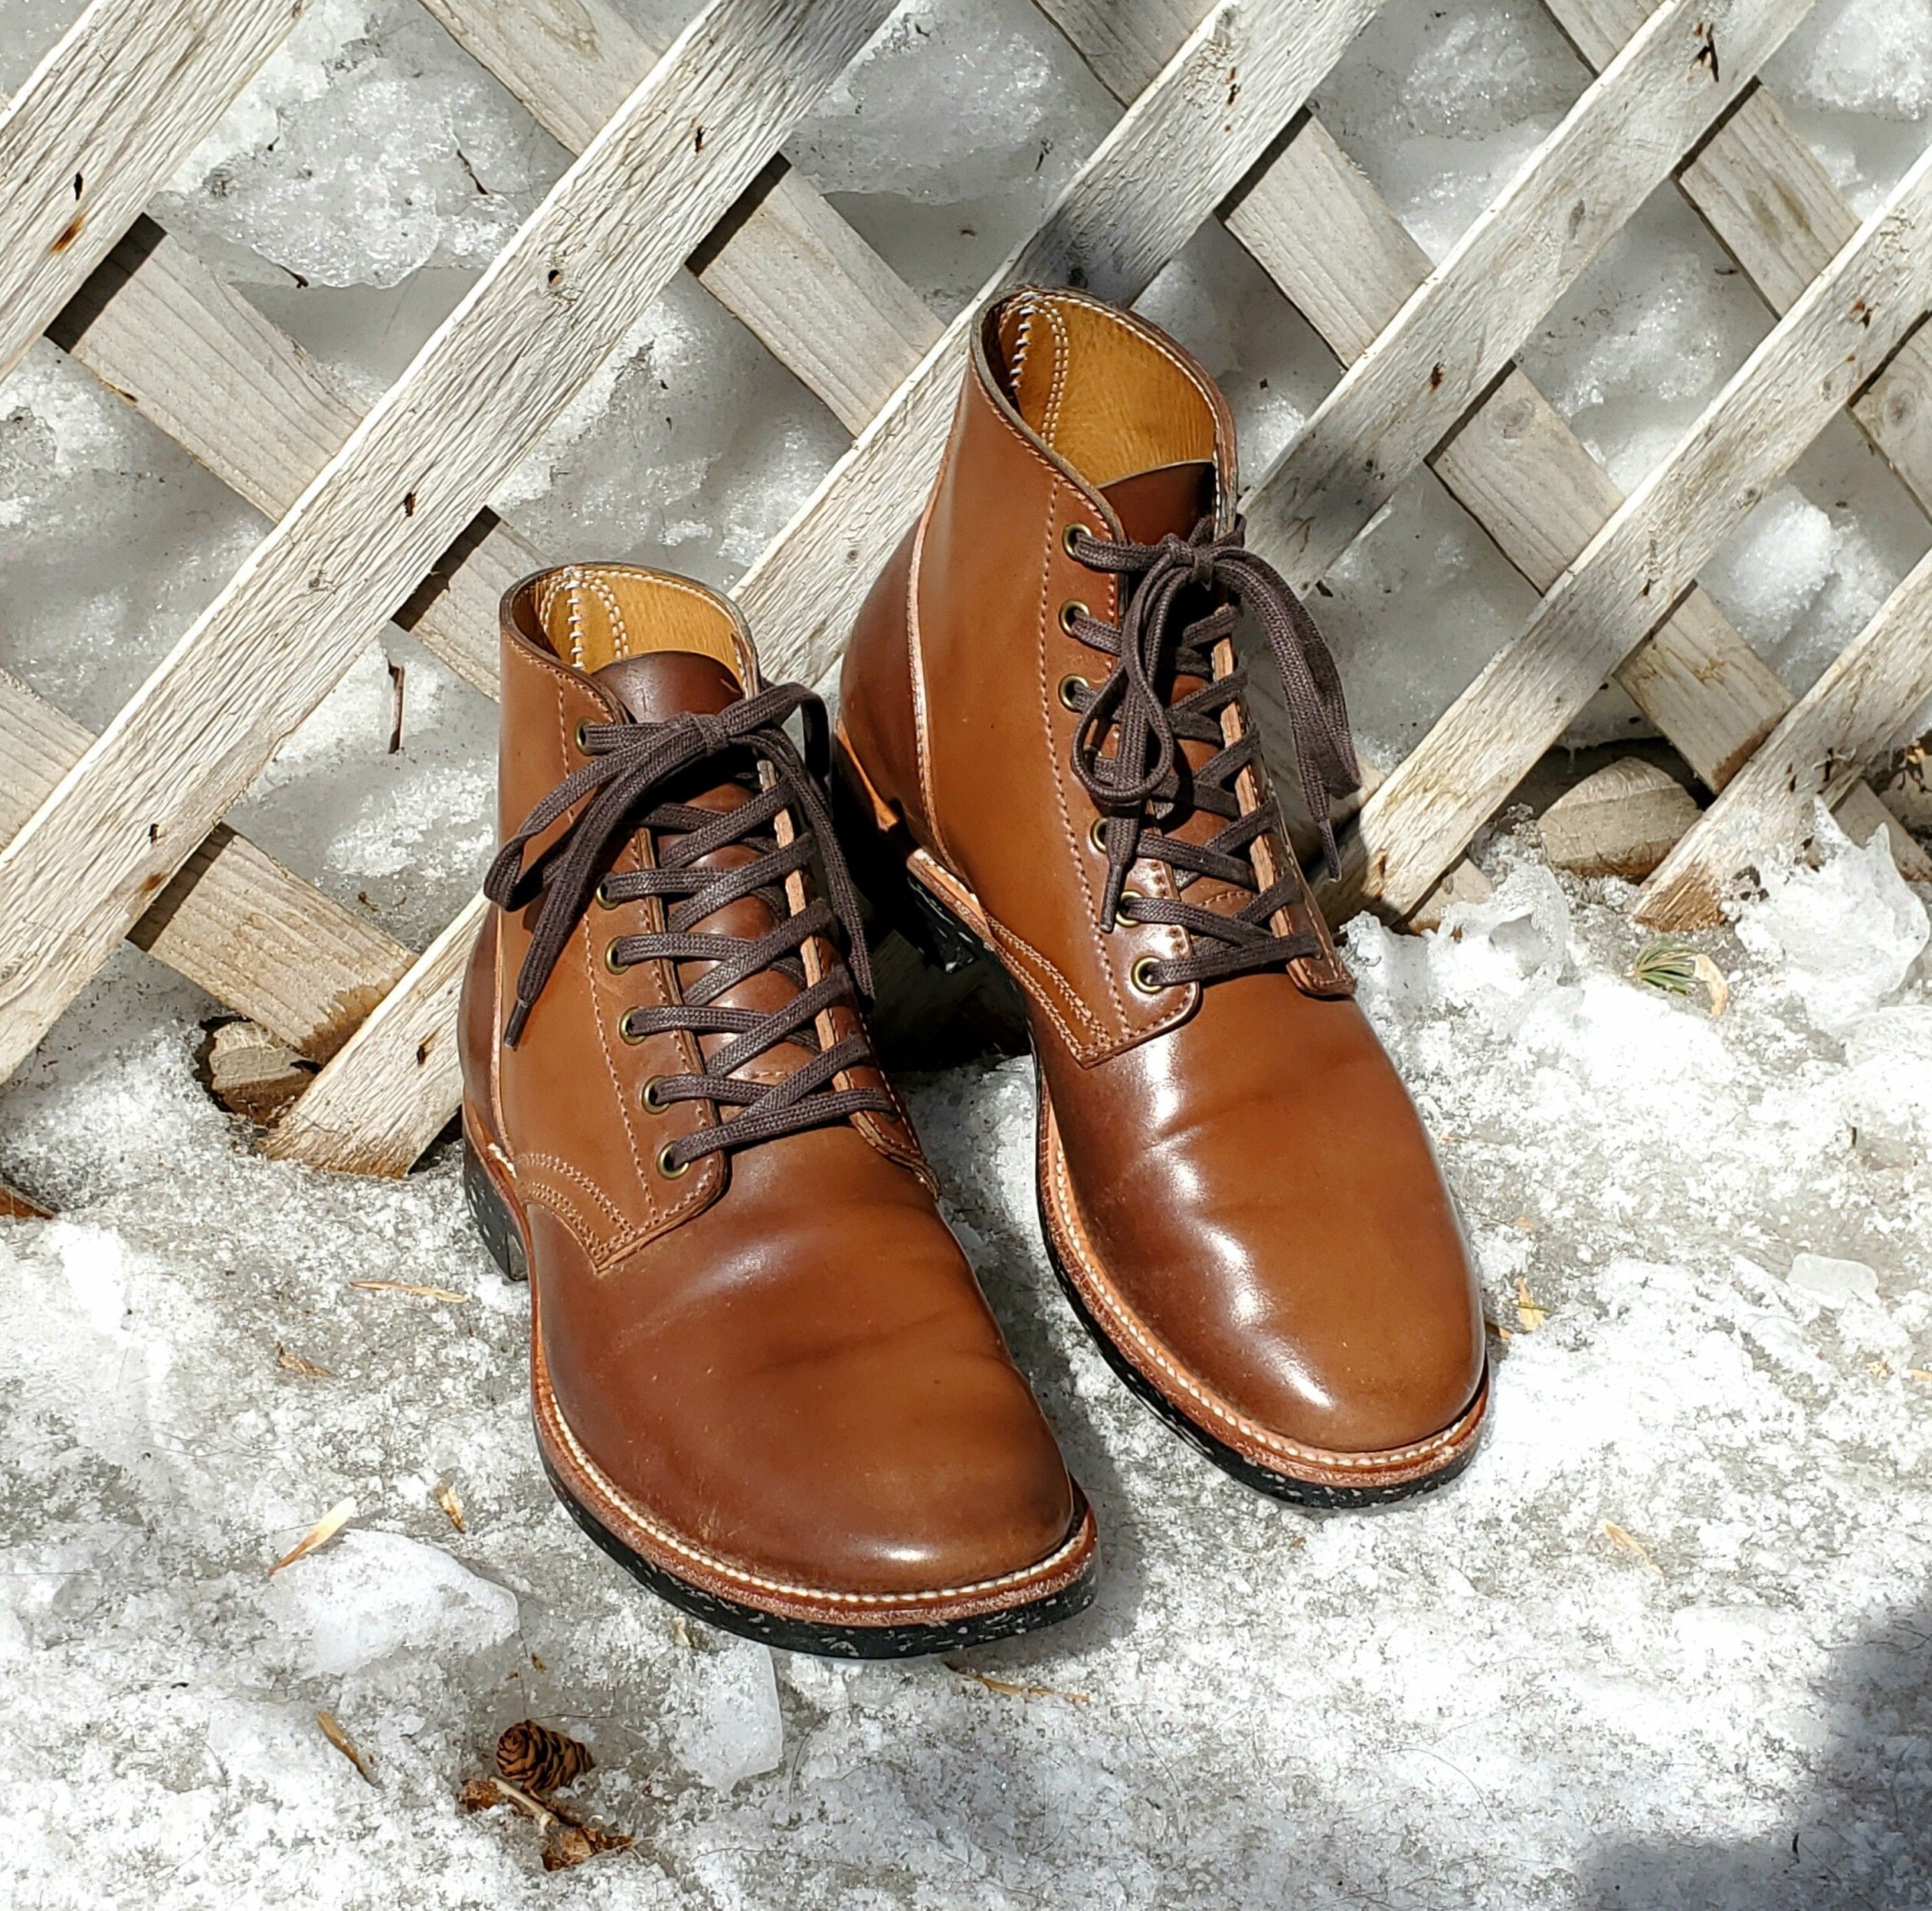 Other QuanShoemaker Natural Shell Cordovan Boots Size US 6.5 / EU 39-40 - 1 Preview